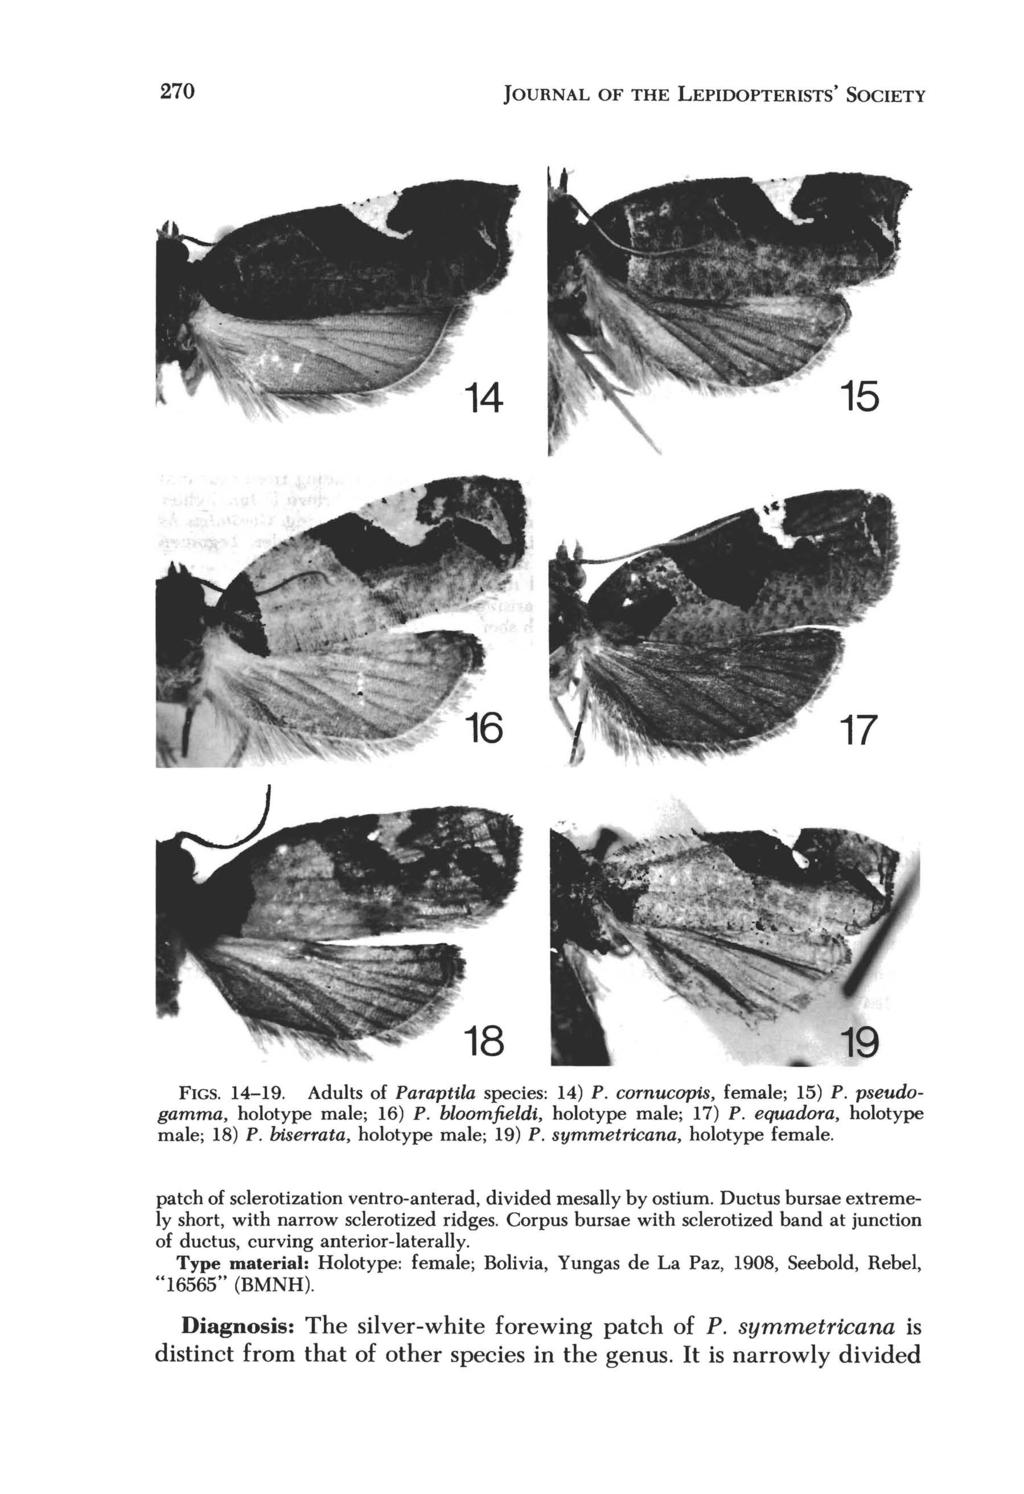 270 JOURNAL OF THE LEPIDOPTERISTS' SOCIETY FIGS. 14-19. Adults of Parapttla species: 14) P. cornucopis, female; 15) P. pseudogamma, holotype male; 16) P. bloomfieldi, holotype male; 17) P.